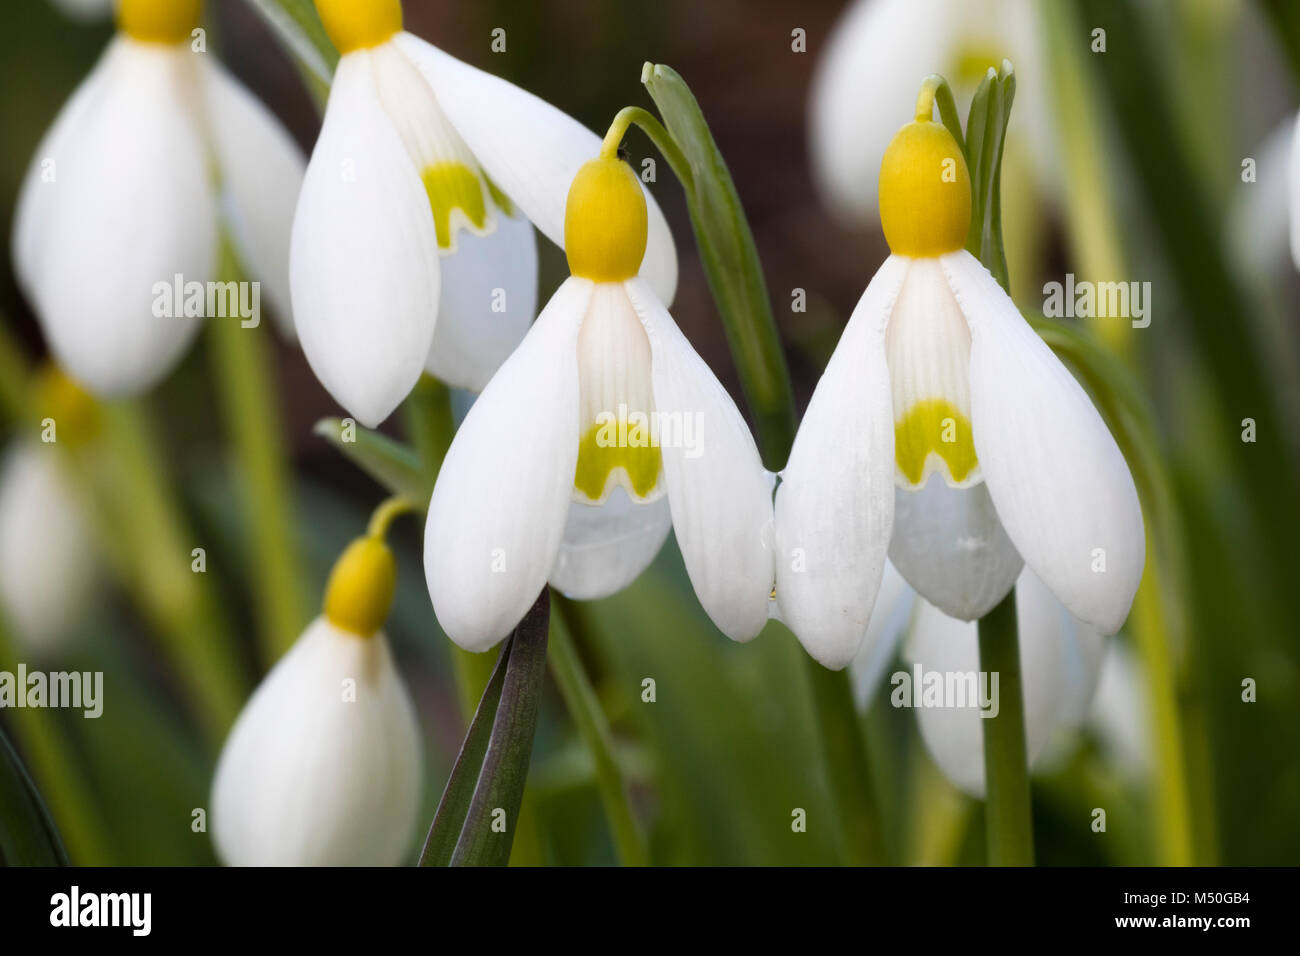 Yellow ovary and petal markings of the unusual snowdrop, Galanthus 'Primrose Warburg' Stock Photo